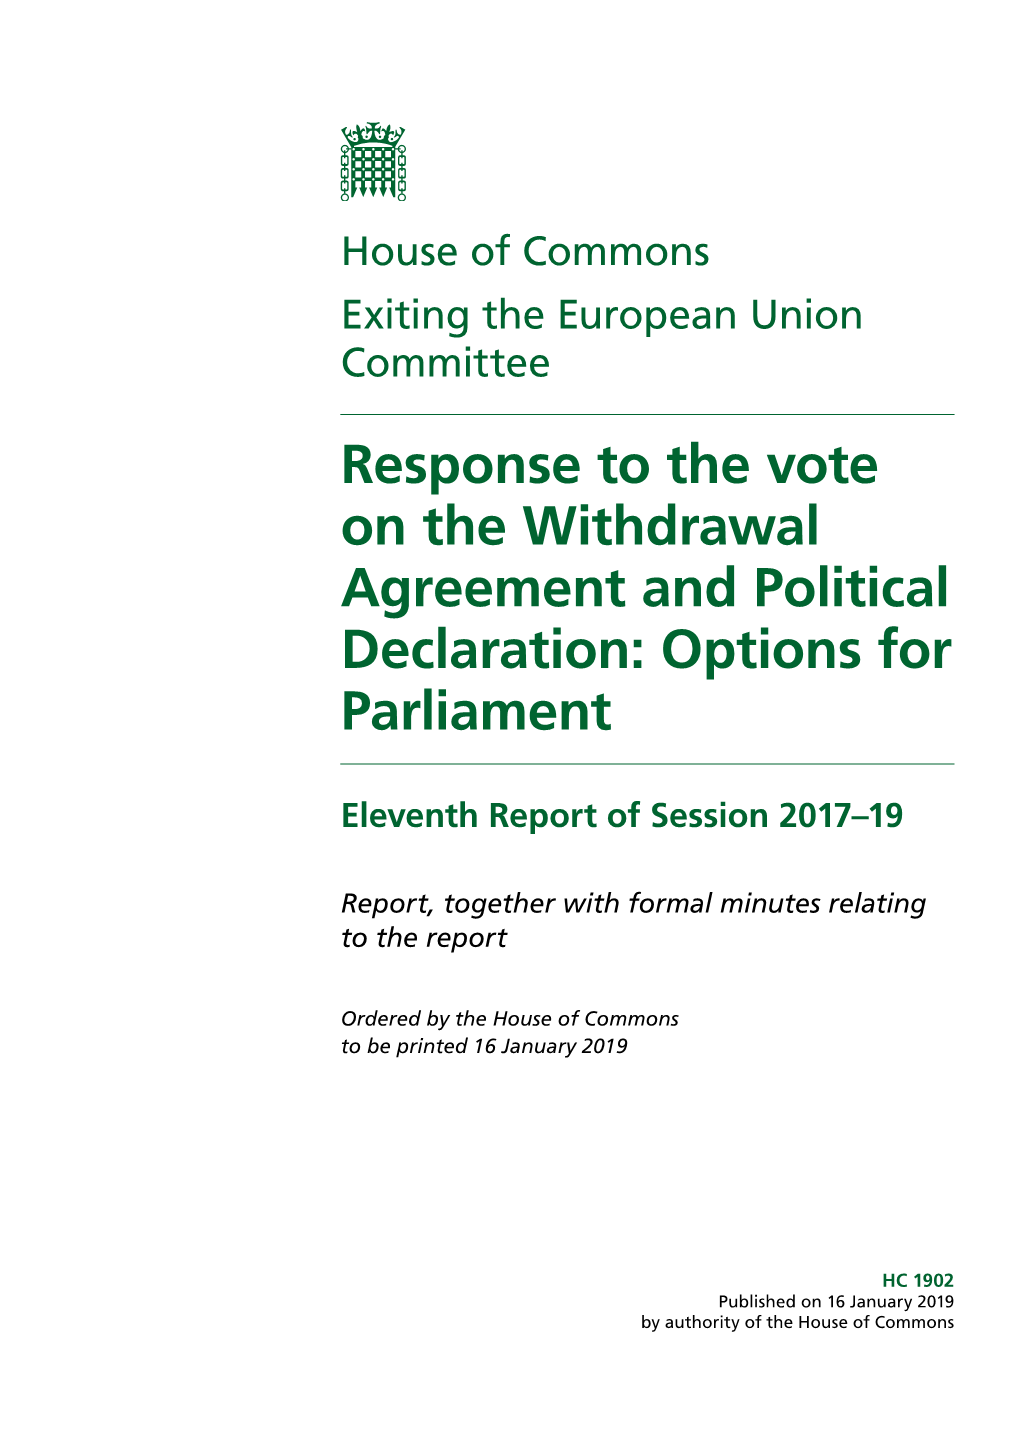 Withdrawal Agreement and Political Declaration: Options for Parliament